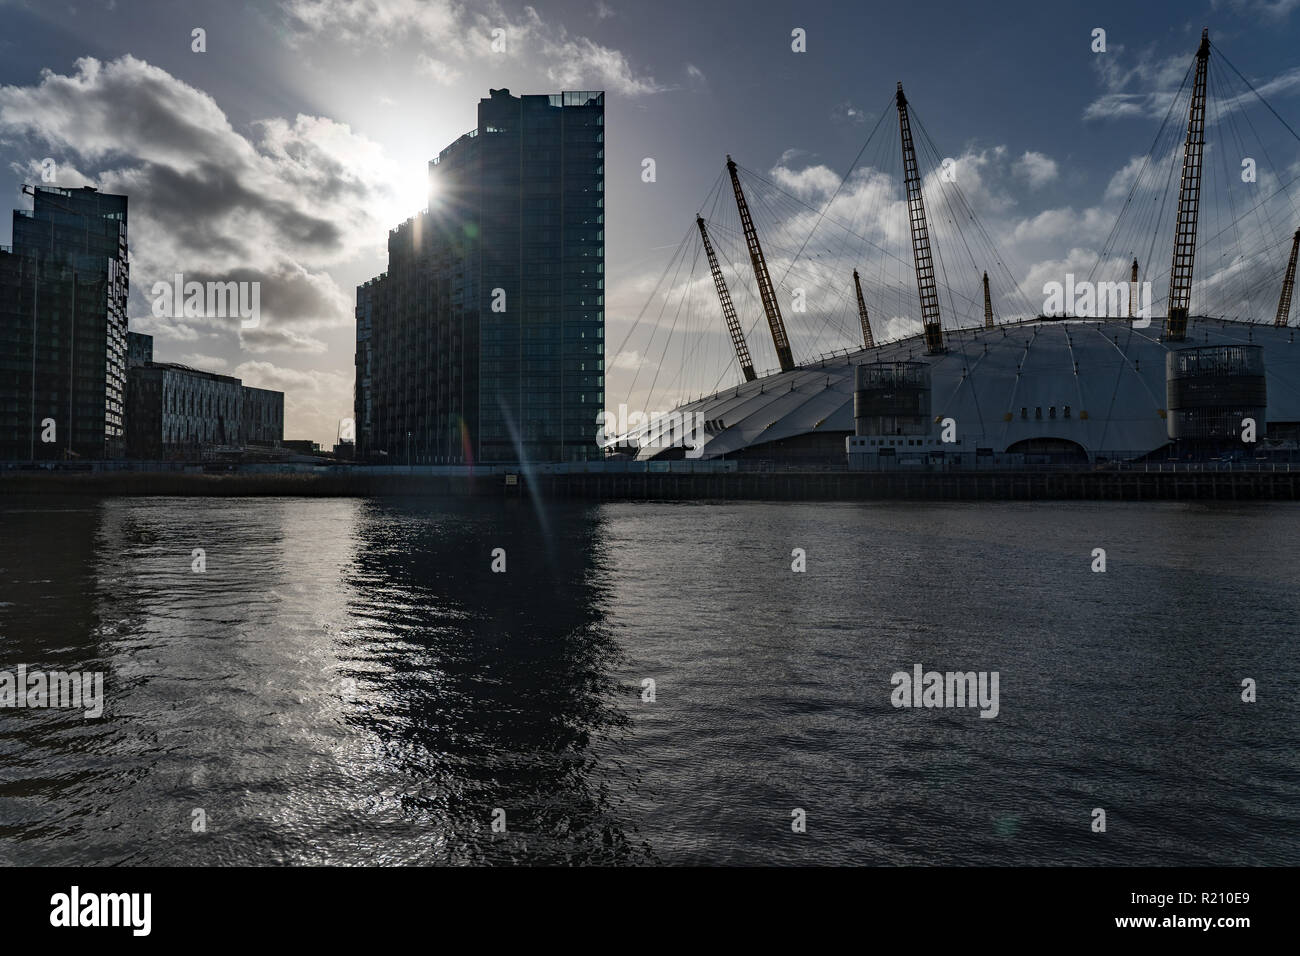 The O2 Arena. From the Open City Thames Architecture Tour East. Photo date: Saturday, November 10, 2018. Photo: Roger Garfield/Alamy Stock Photo